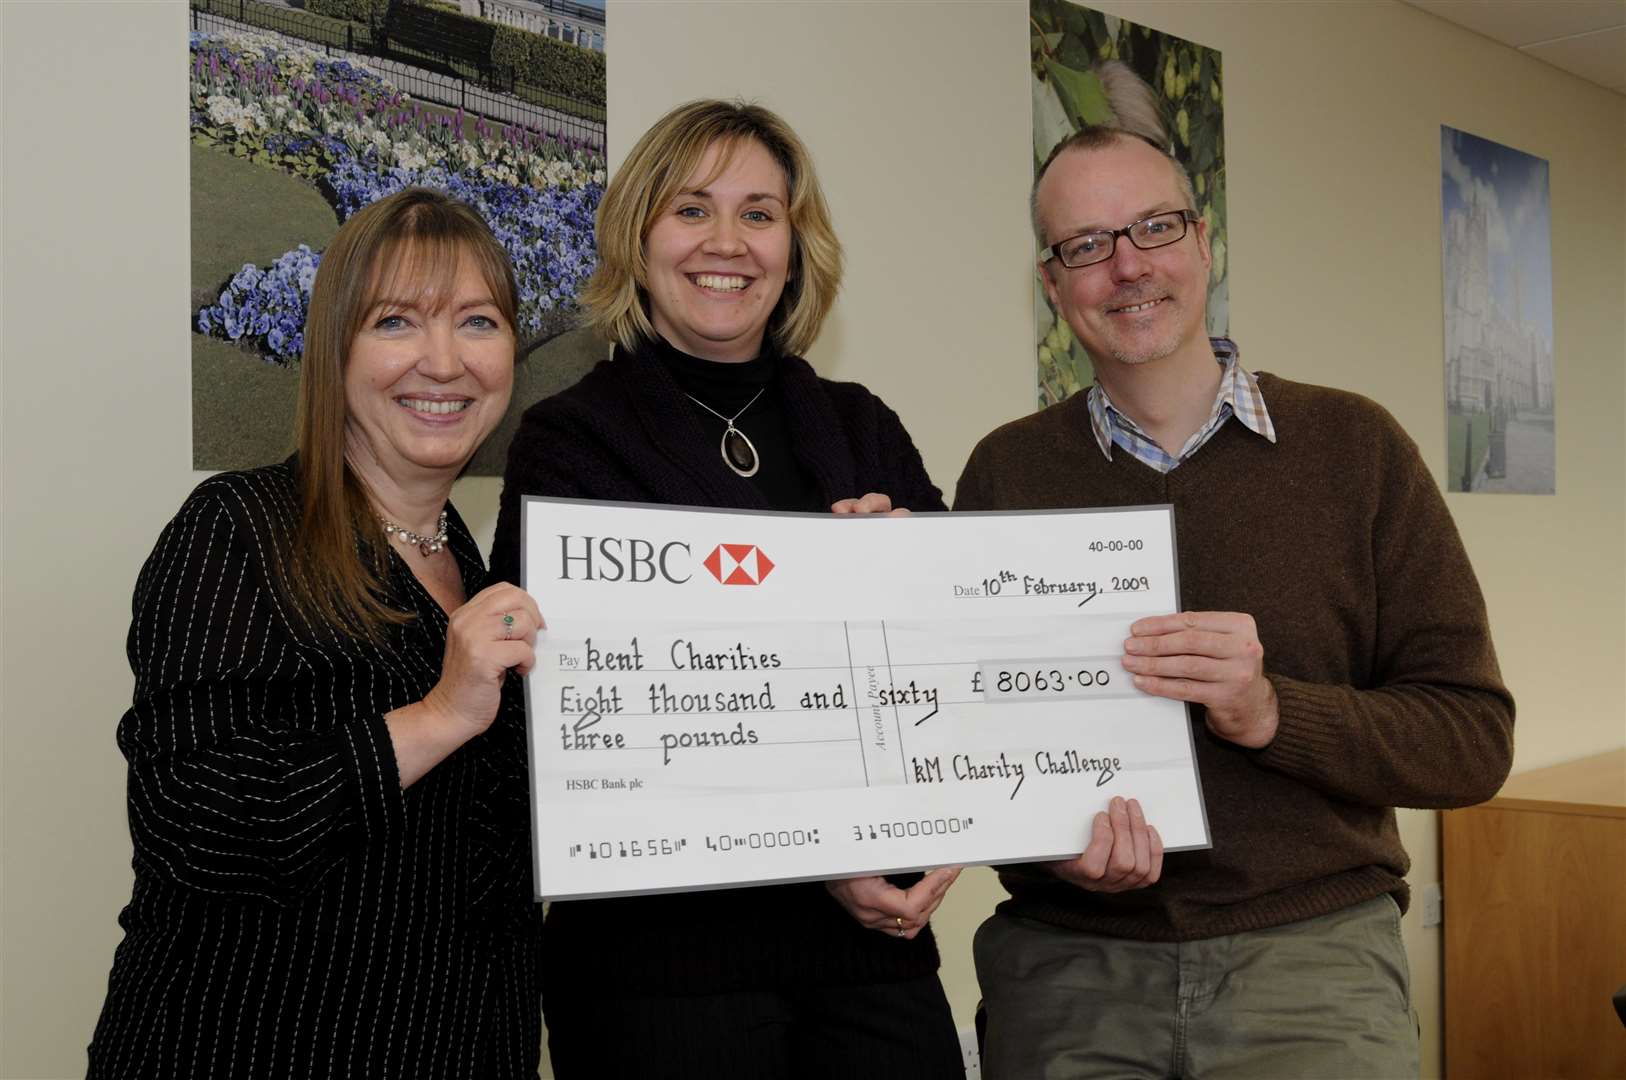 Carol Davies, left, presents Paula Ray of Walking Bus and Dan Powell of Clic Sargent with a giant cheque in 2009. Picture: Paul Amos